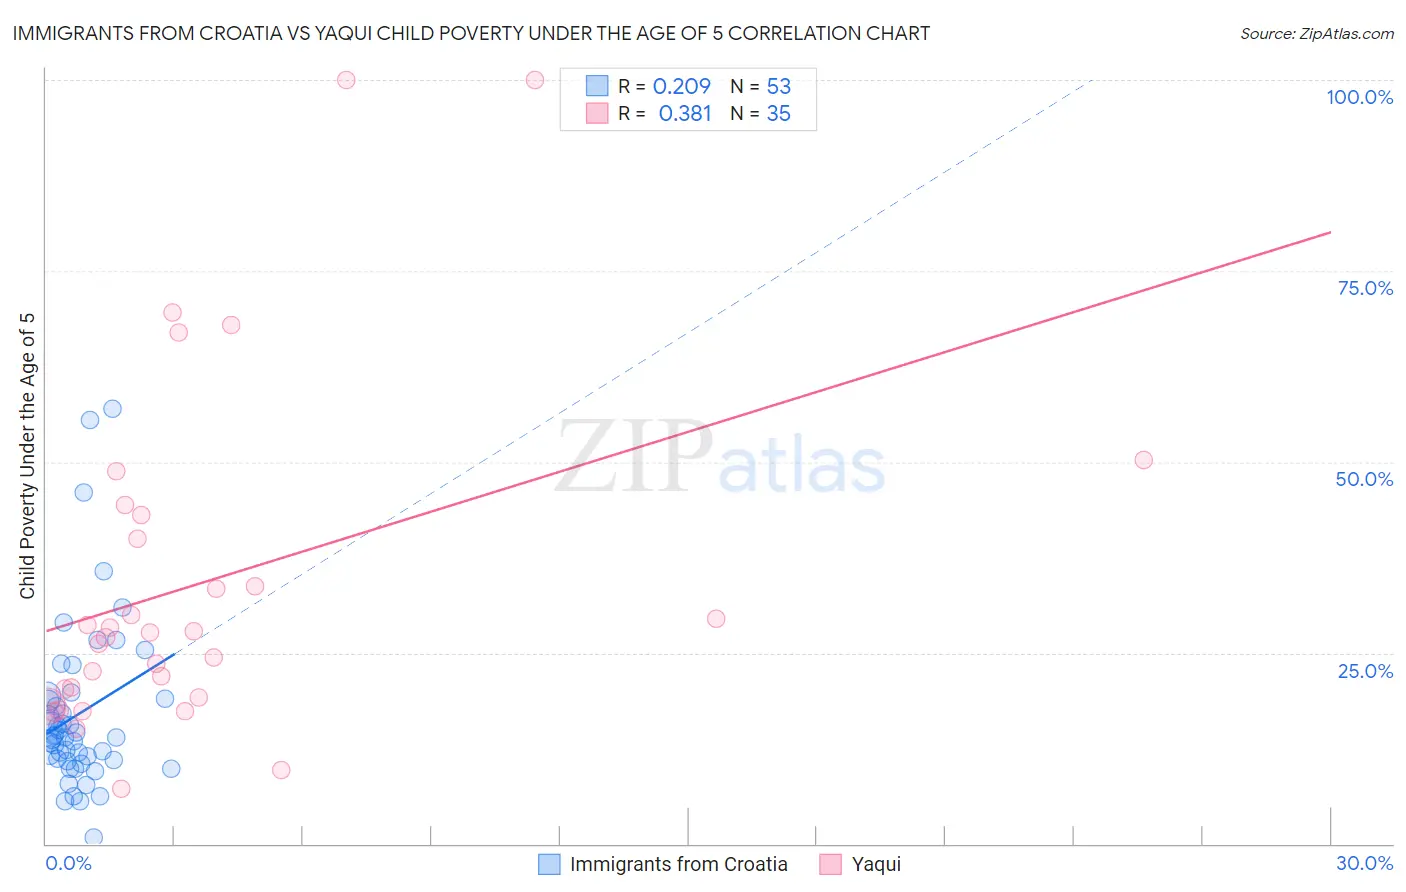 Immigrants from Croatia vs Yaqui Child Poverty Under the Age of 5